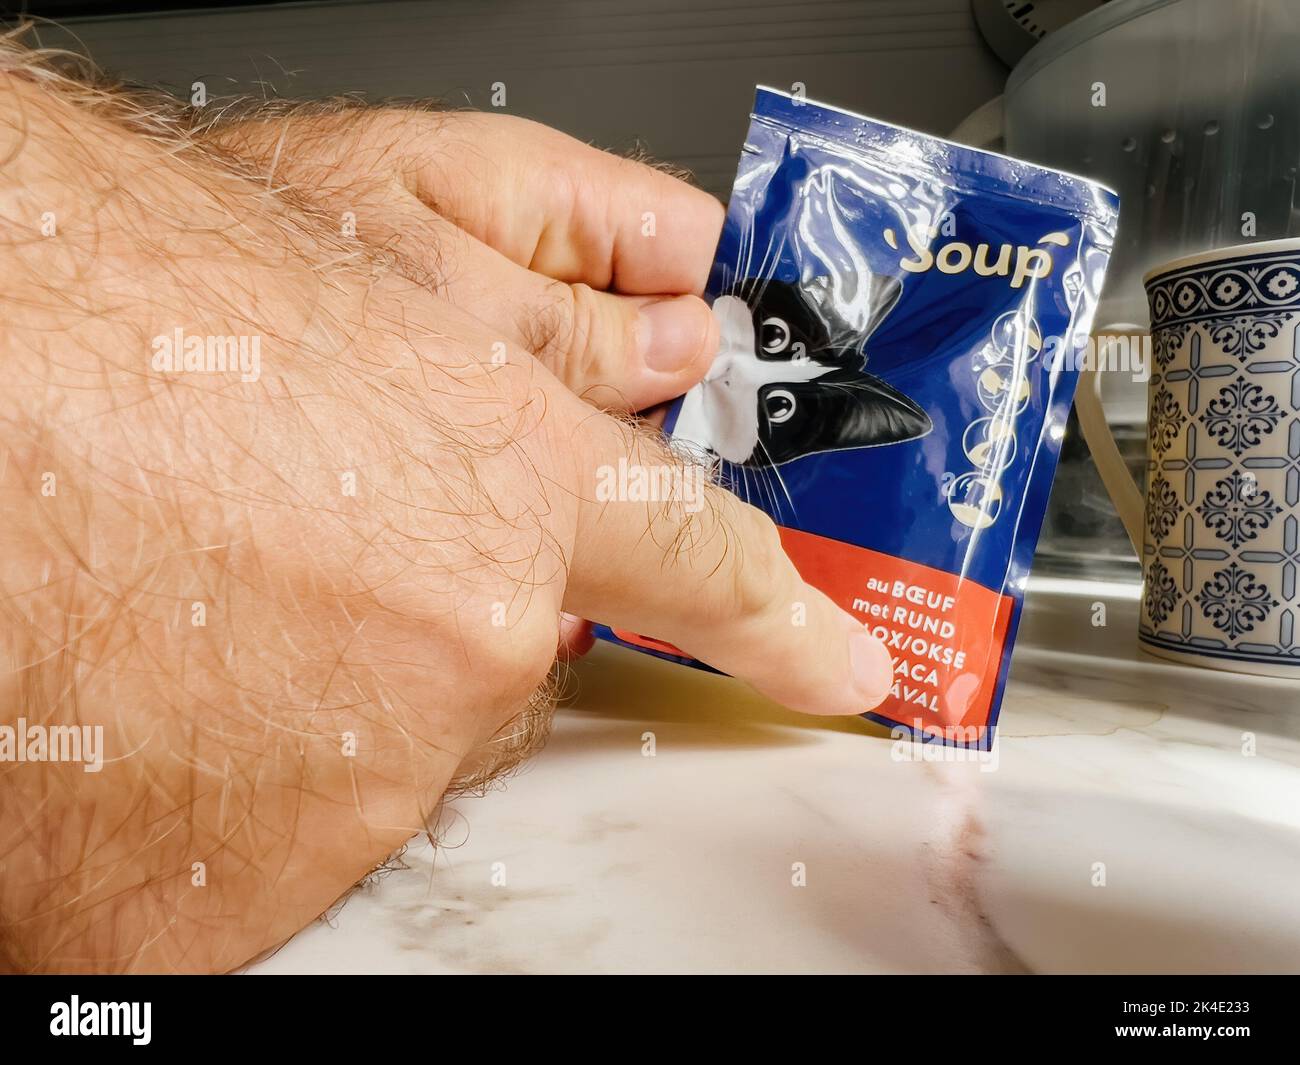 Paris, France - Sep 13, 2022: POV male hand holding pouch with Felix wet cat food beef taste - modern kitchen background preparing to feed the pet cat animal Stock Photo